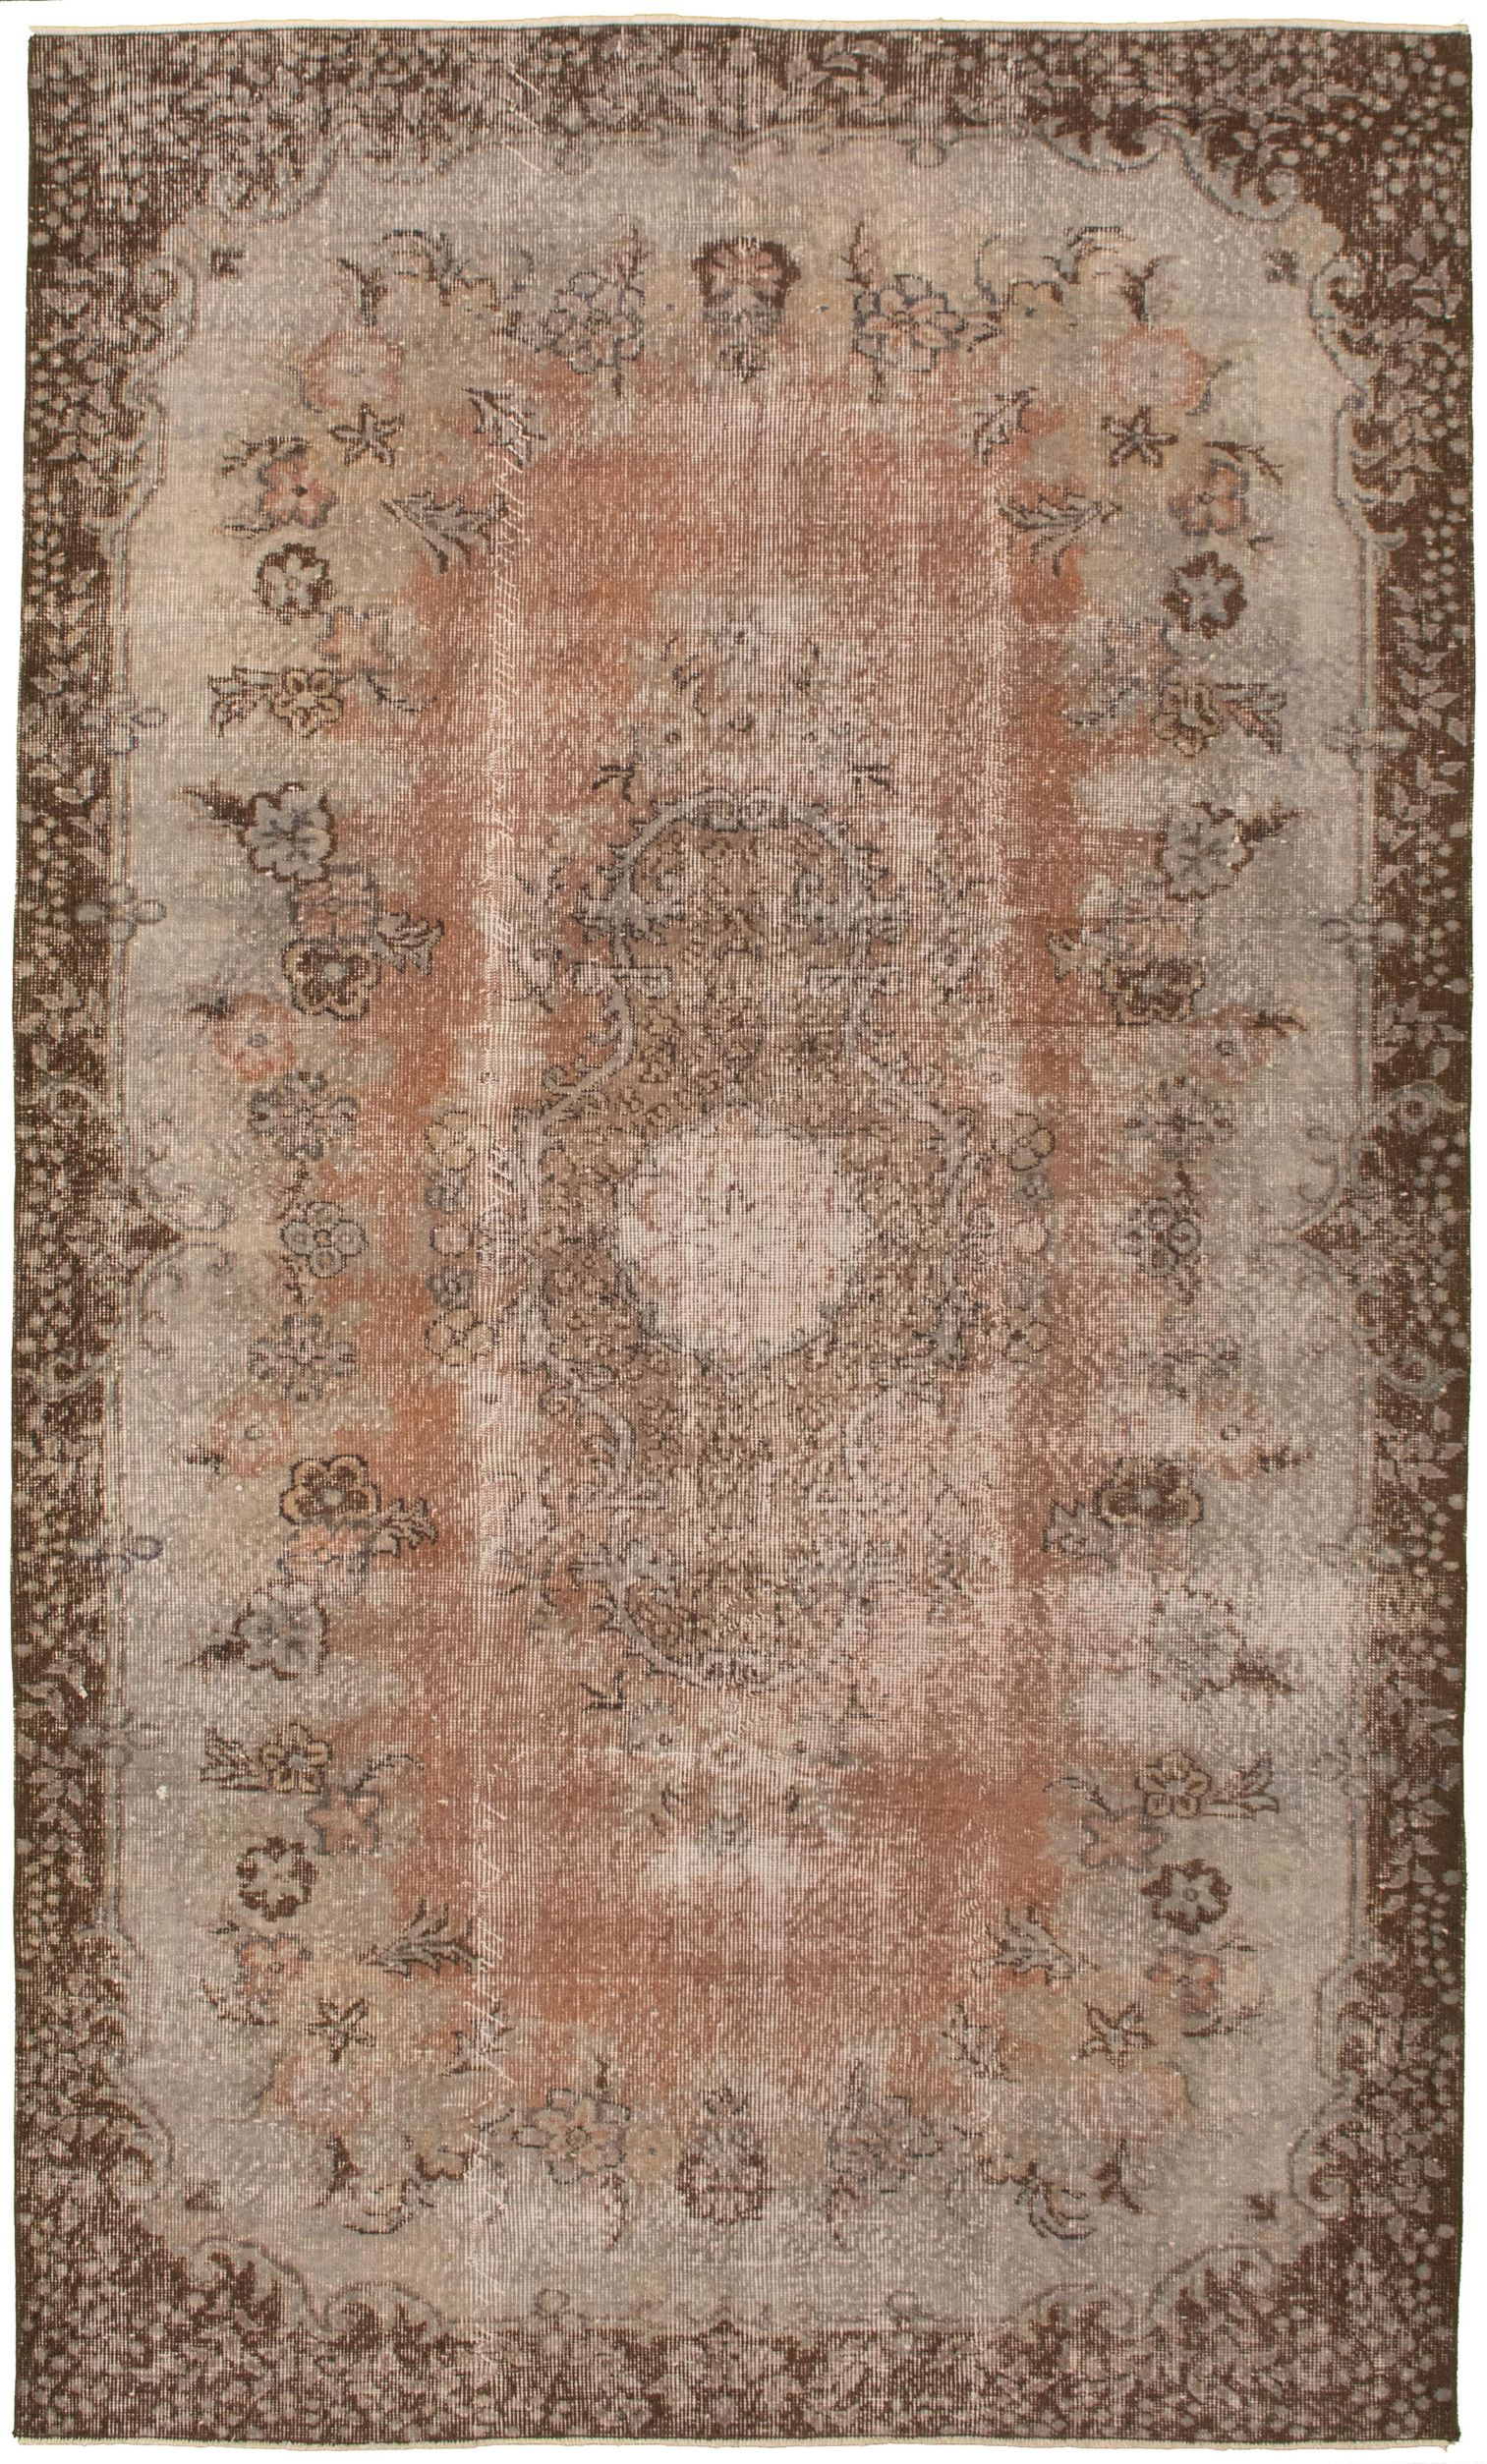 Hand-knotted Color Transition Copper, Grey Wool Rug 5'8" x 9'8" Size: 5'8" x 9'8"  